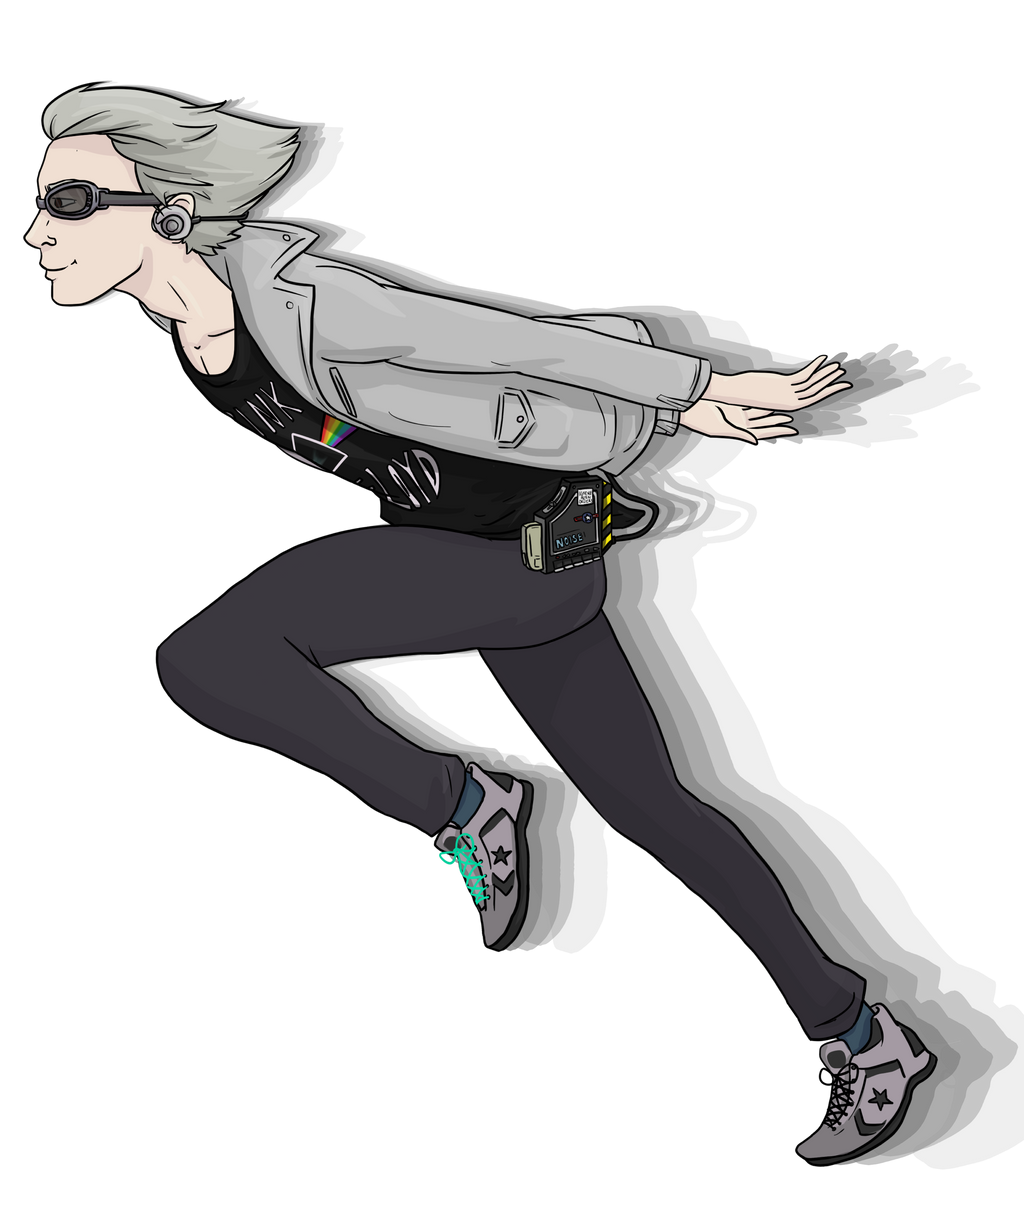 quicksilver naruto-running by Toodlenoodle on DeviantArt